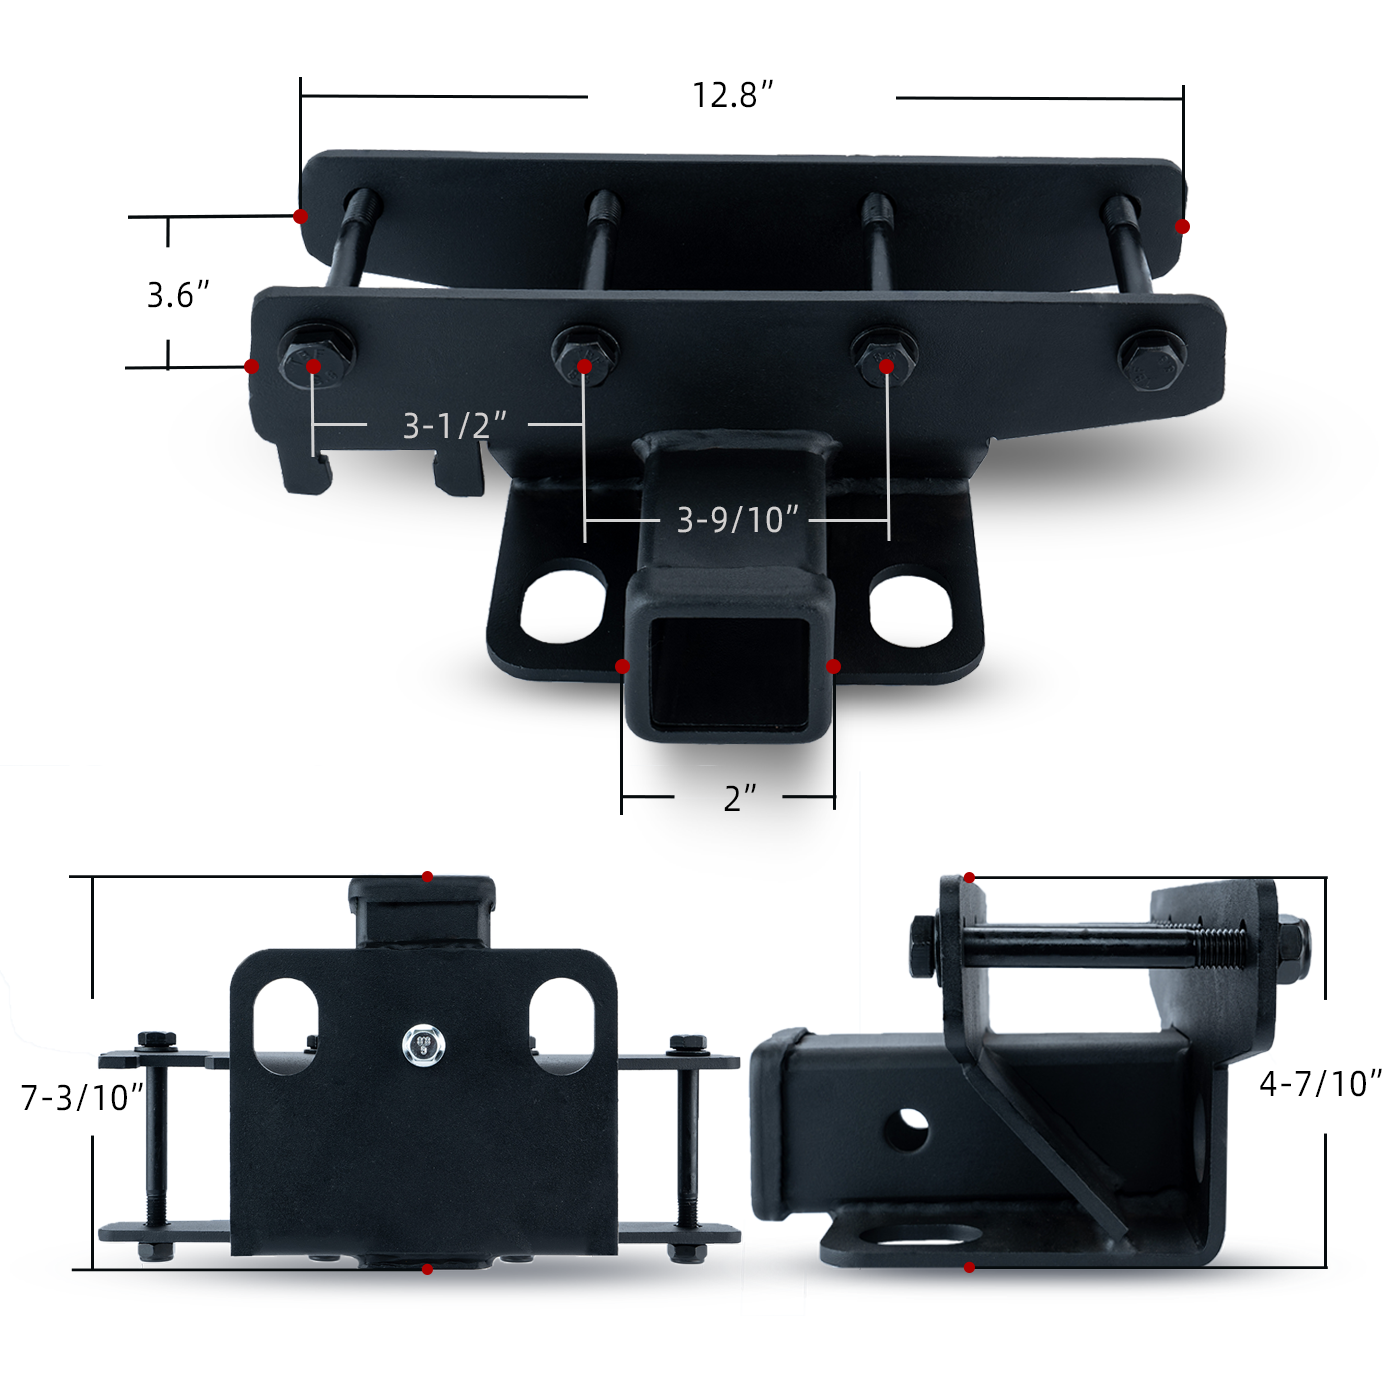 OPENROAD Trailer 2" Rear Receiver Hitch, Class 3 Hitch & Cover Kit Towing Combo Compatible Trailer hitch OPENROAD   